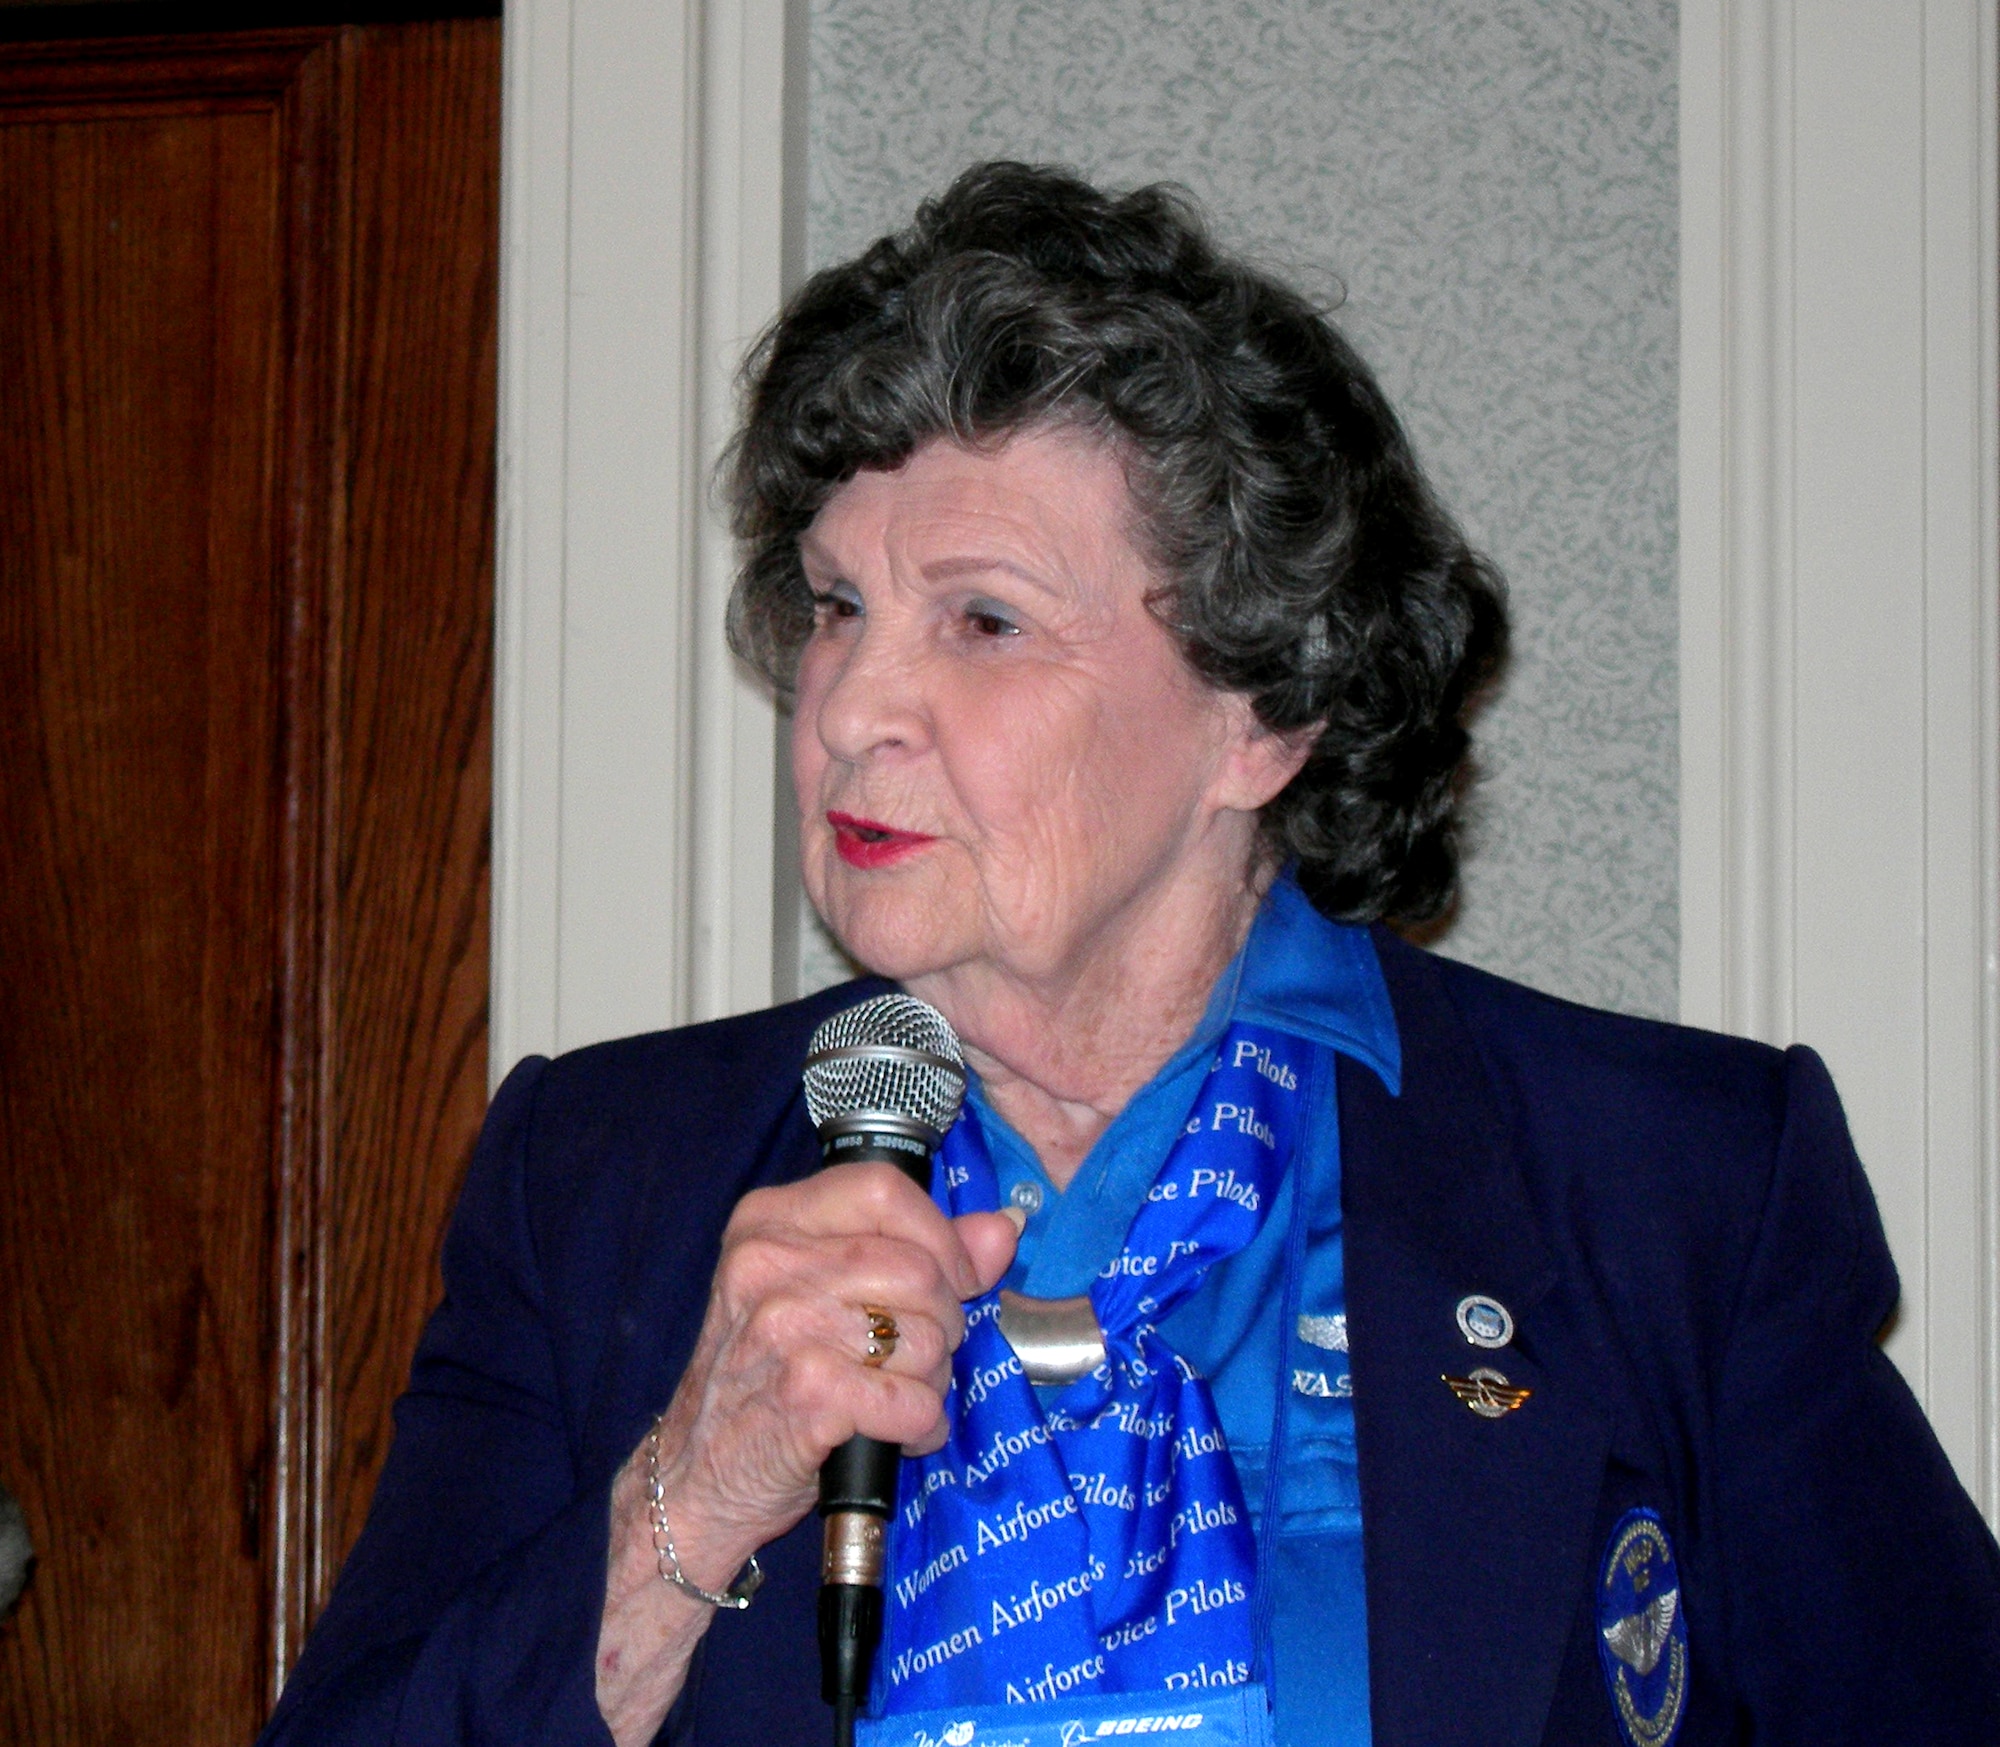 Retired Air Force Lt. Col. Betty Jane Williams speaks during a Women Airforce Service Pilots, or WASP, panel at the 17th Annual Inernational Women in Aviation Conference in Nashville, Tenn., Saturday, March 25, 2006. Colonel Williams was inducted into the organization's Pioneer Hall of Fame. (U.S. Air Force photo/Annette Crawford)